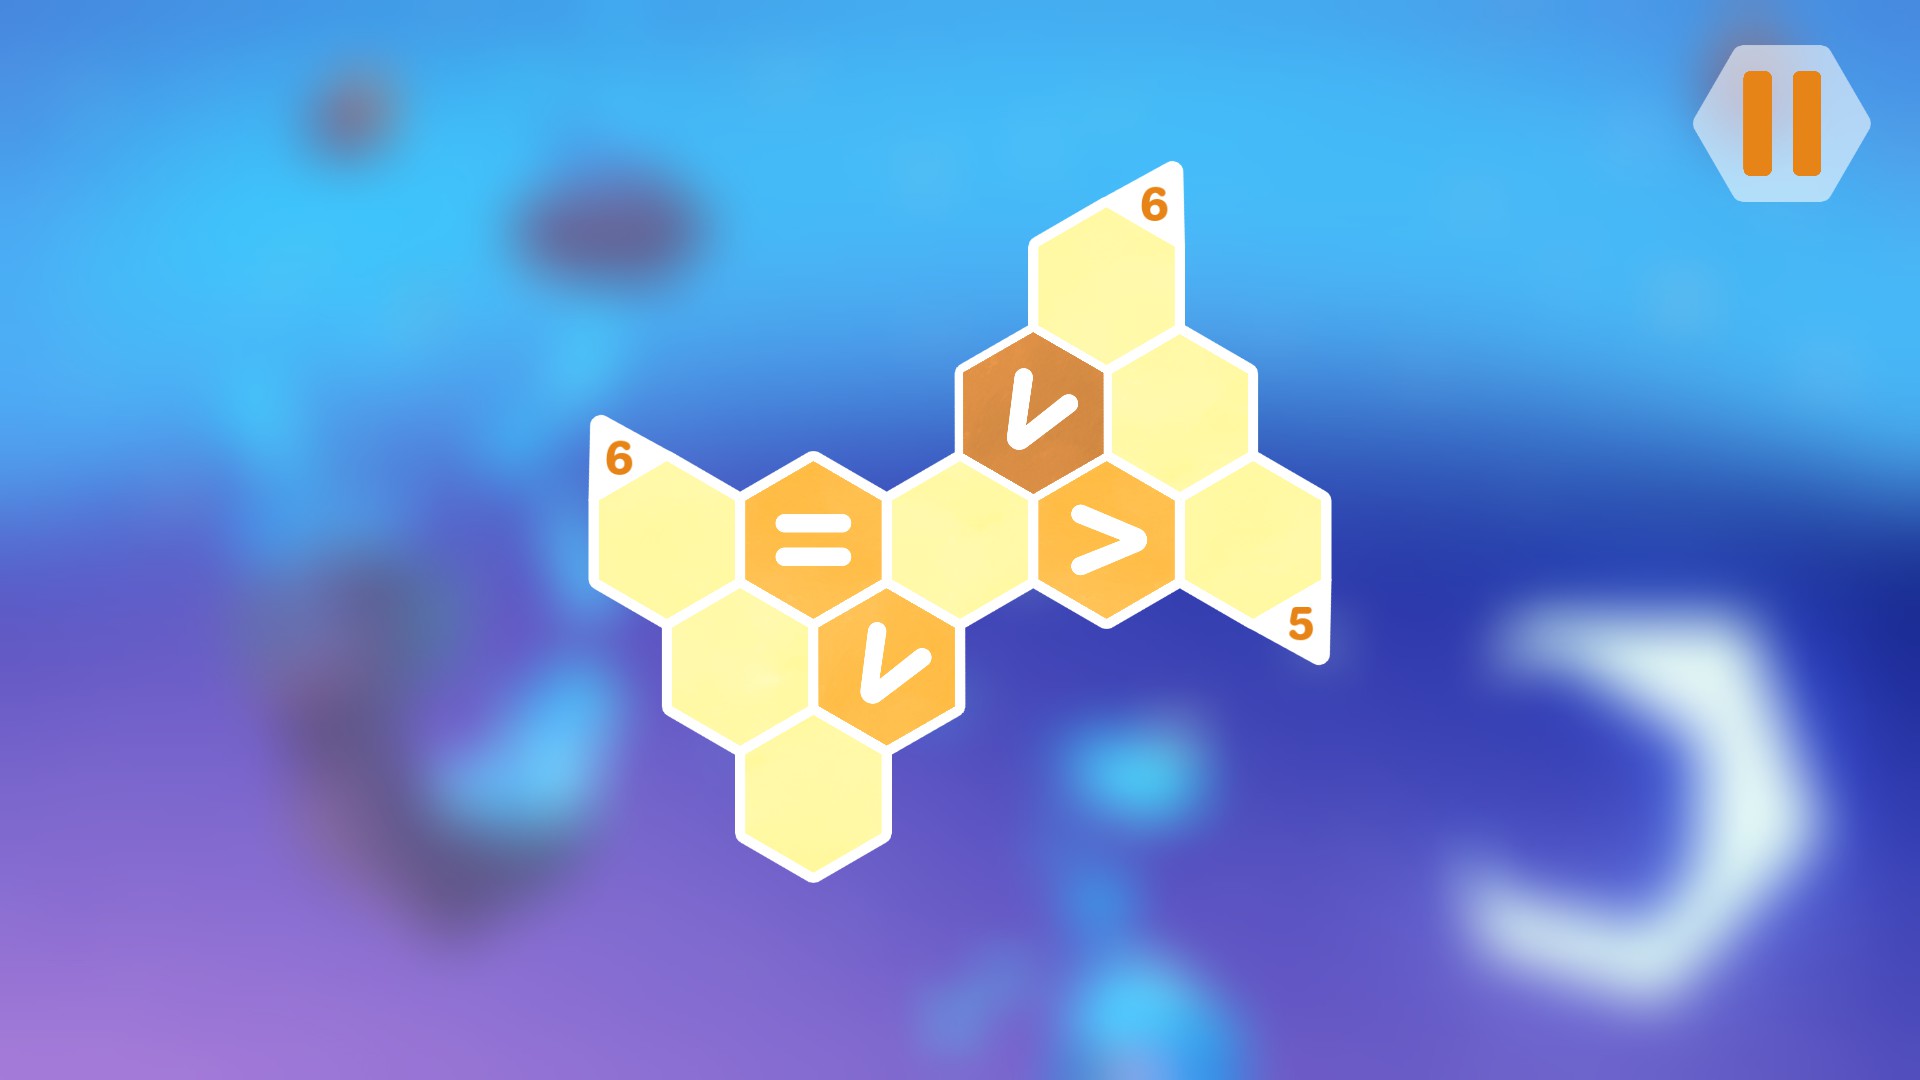 Hexologic is a smart puzzle experience.